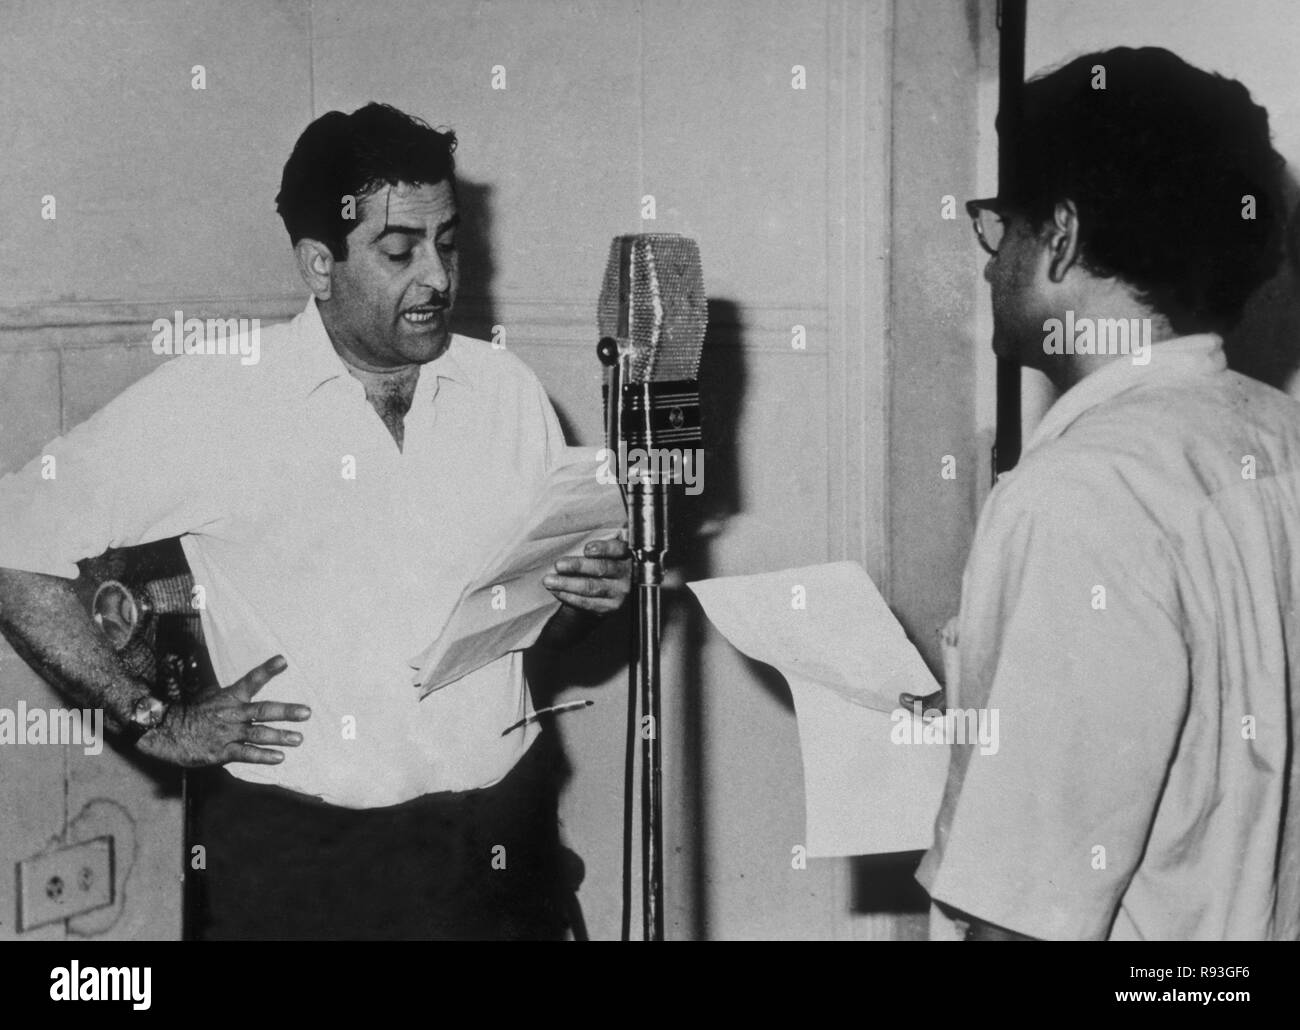 South Asian Indian bollywood actor raj kapoor dubbing for his film, india, NO MR Stock Photo